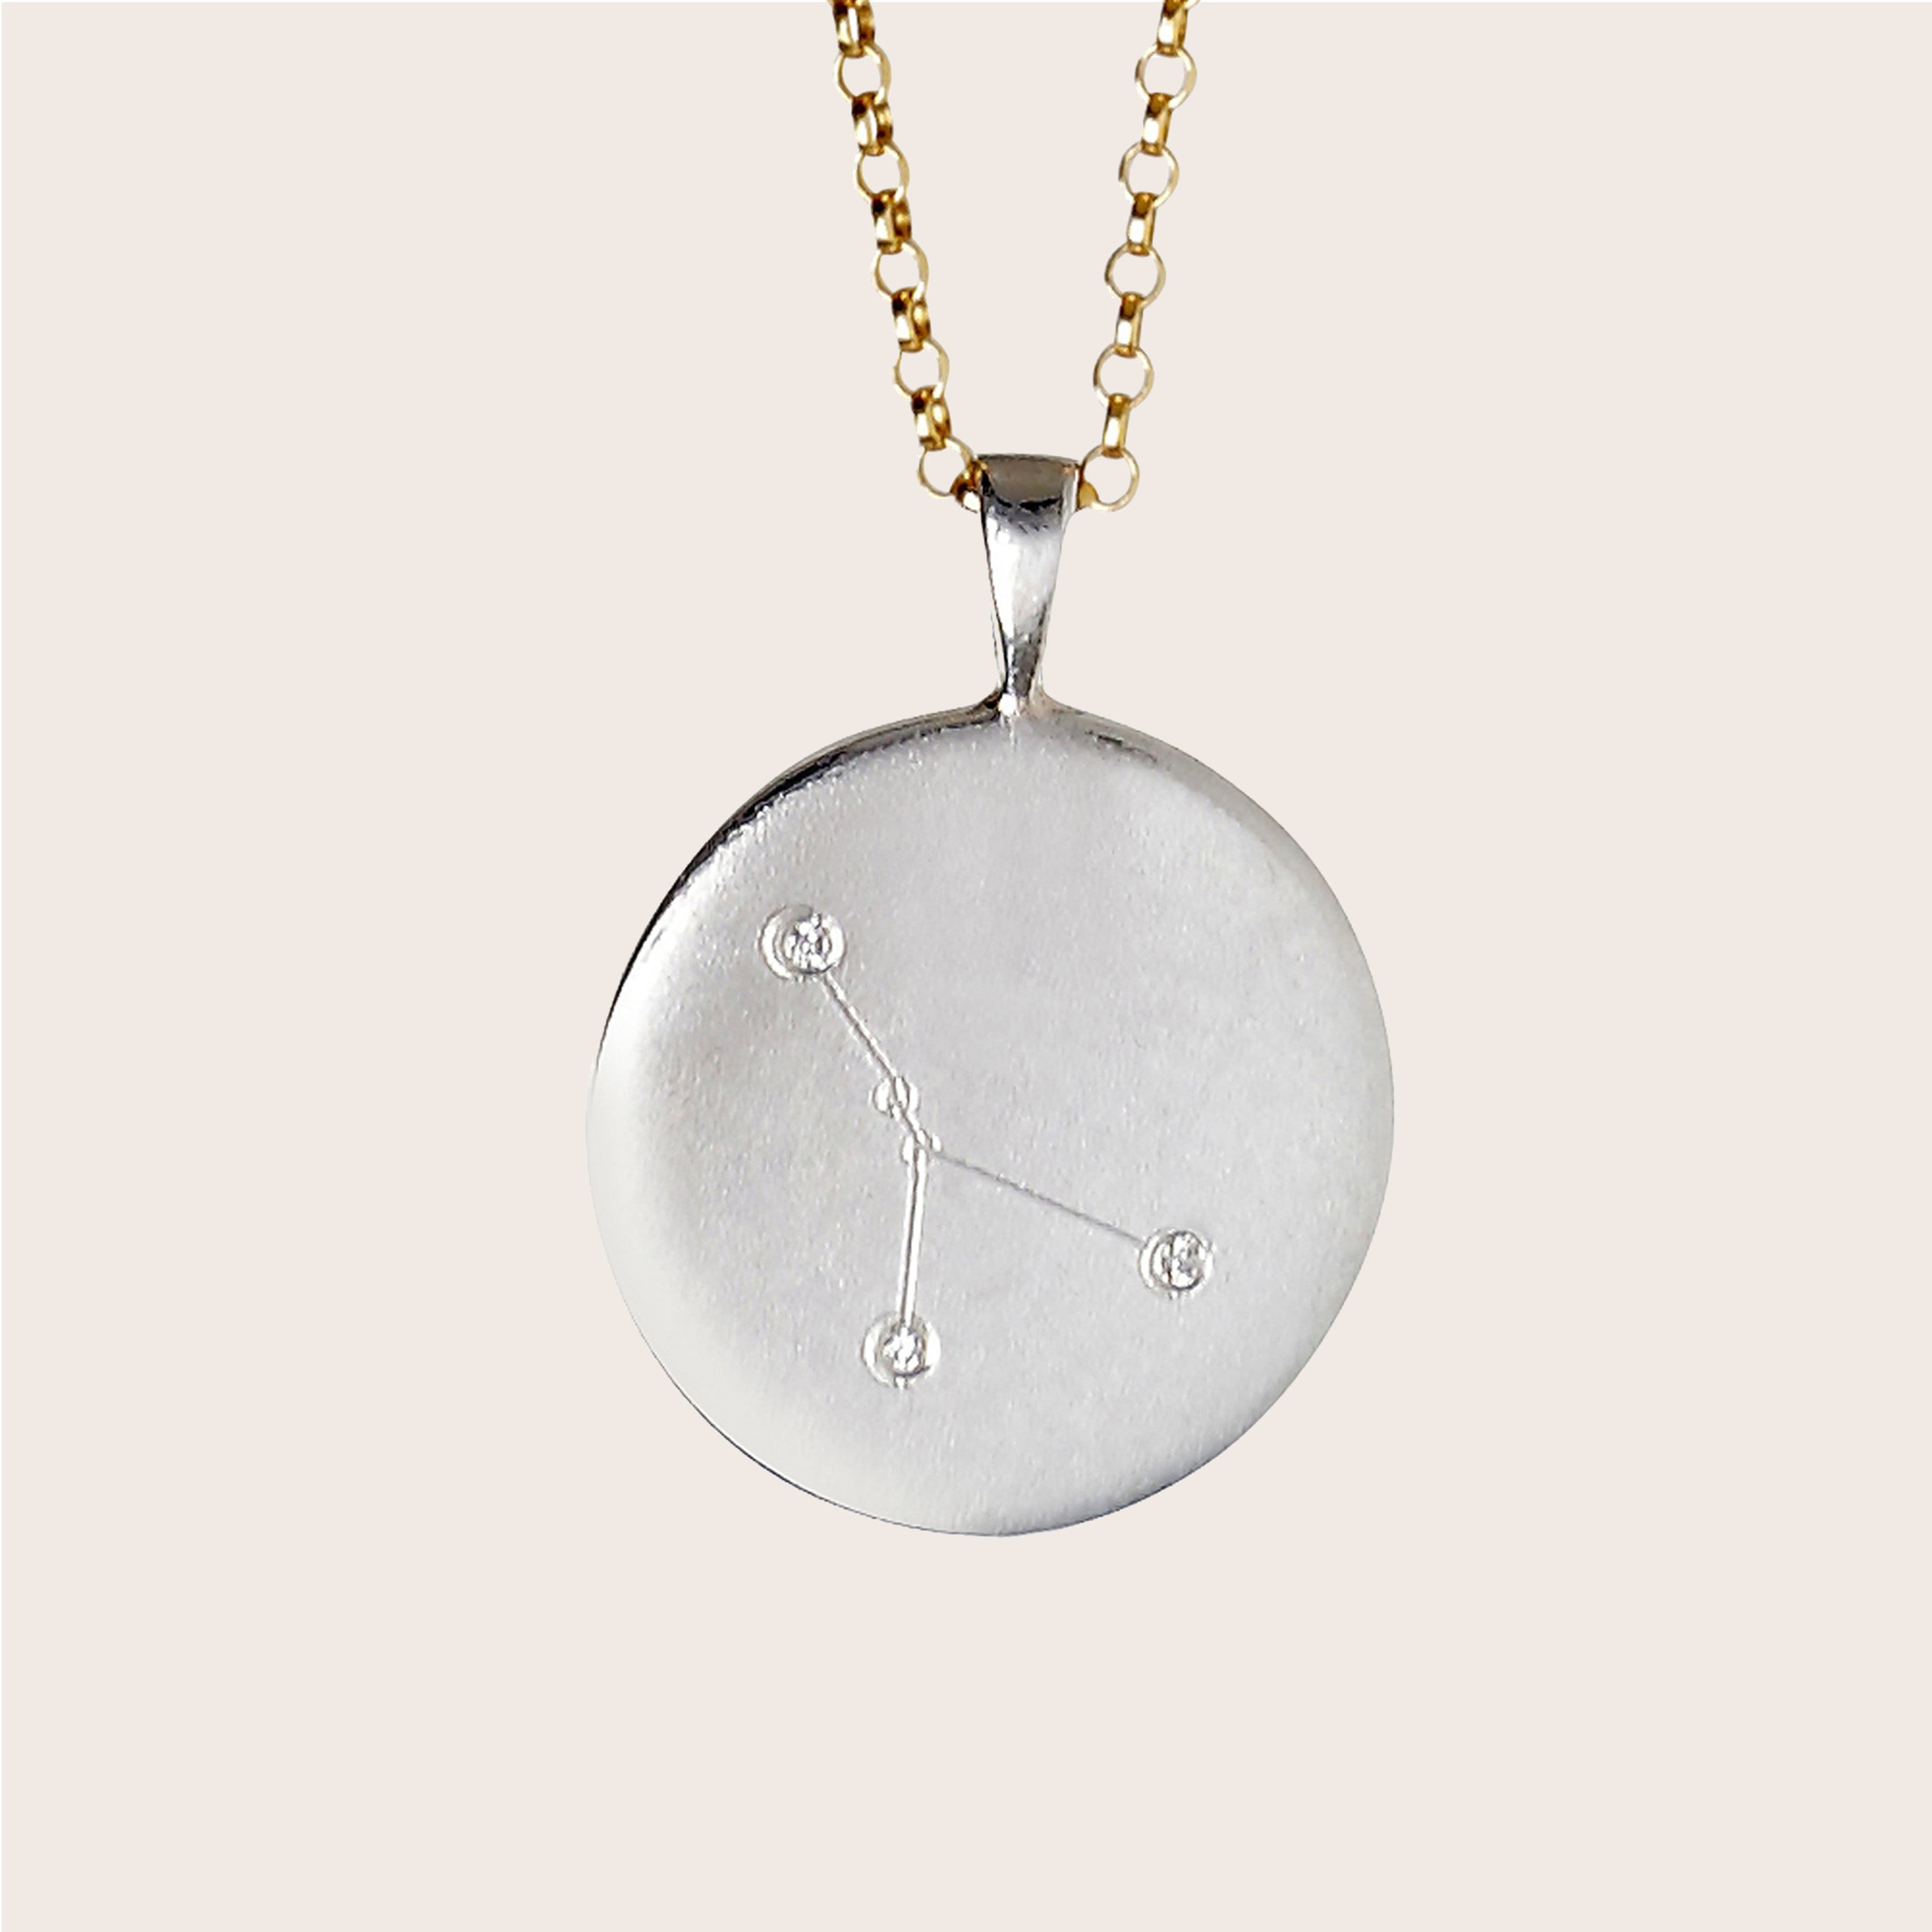 Cancer Constellation Diamond Necklace - Rock the Jumpsuit